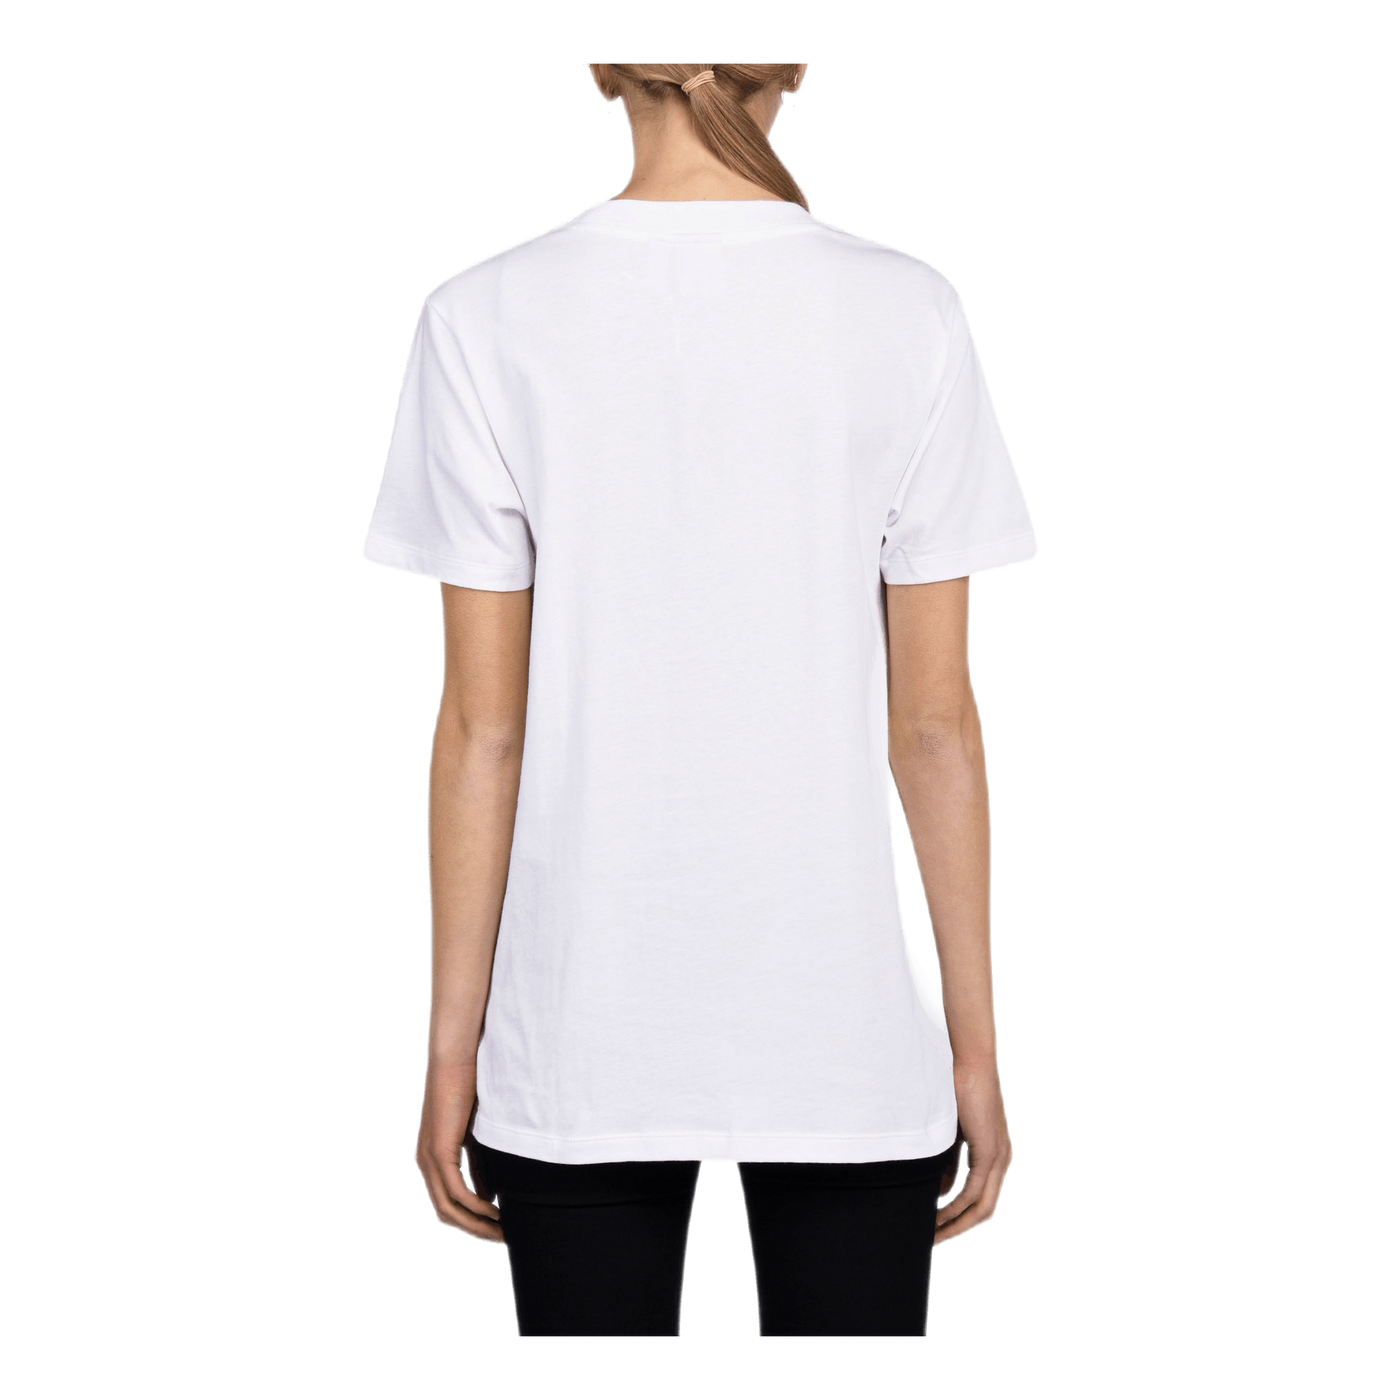 Styling Complements Tee White